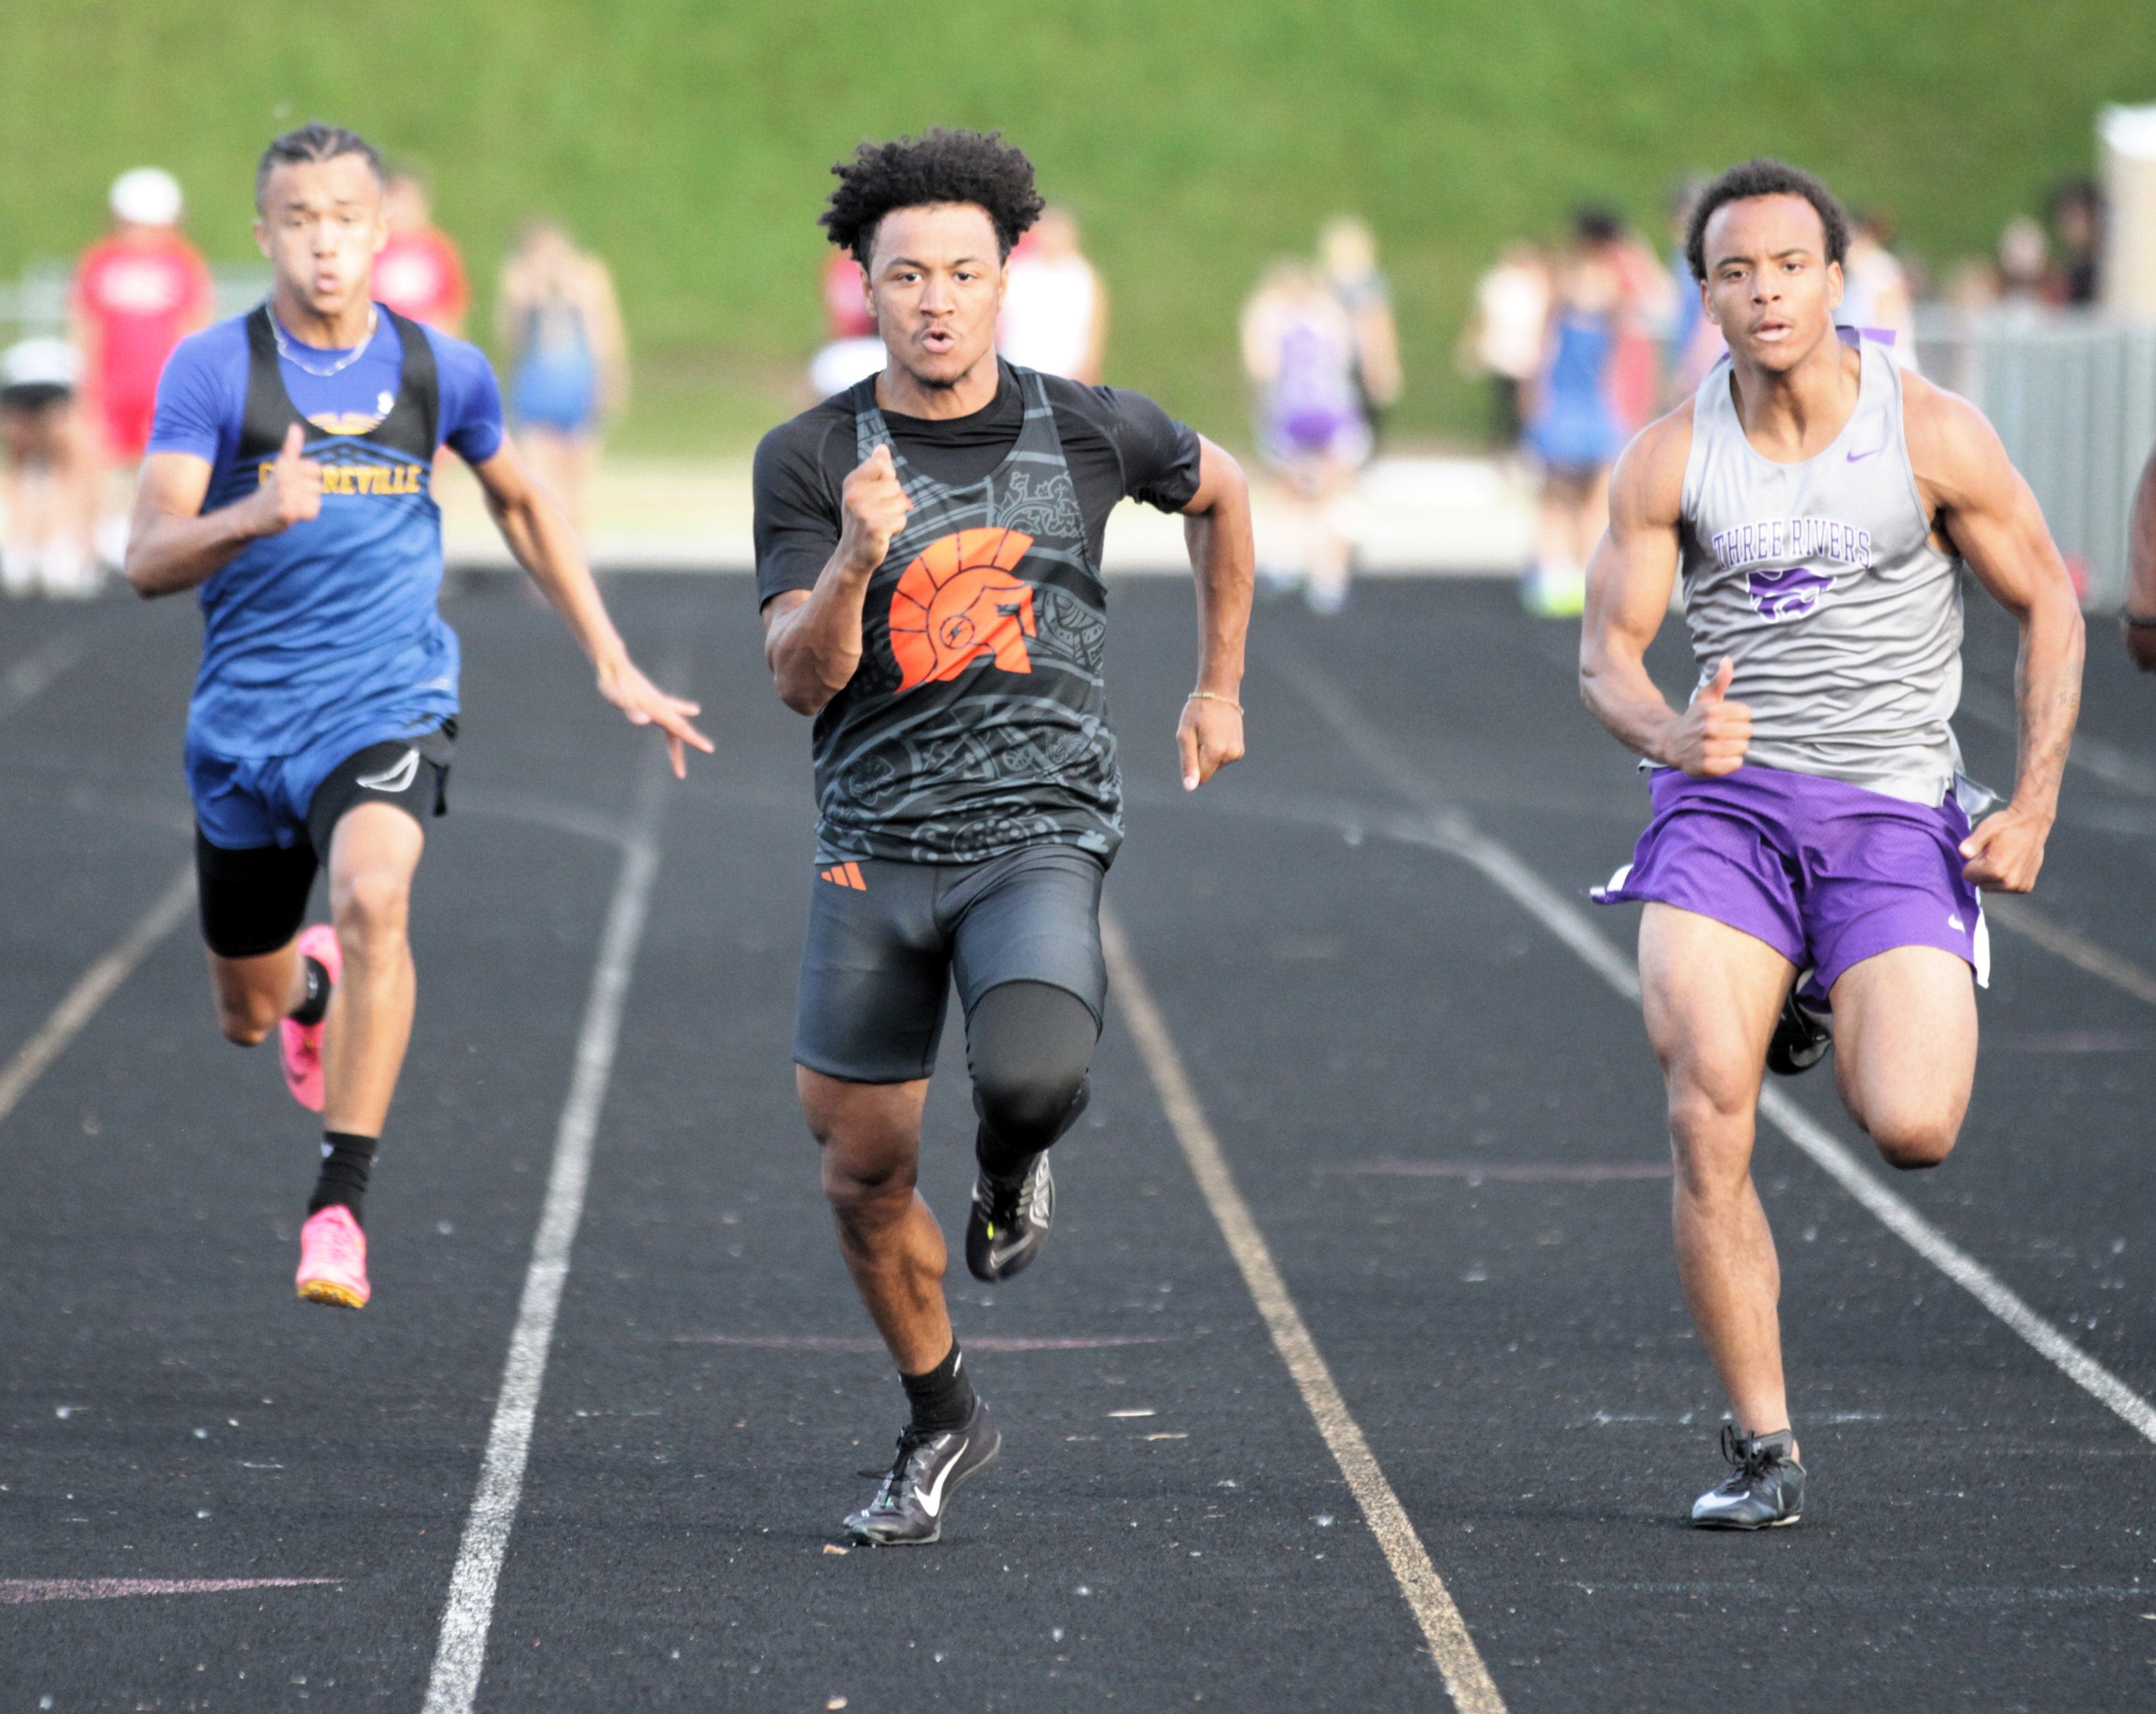 Here are the complete results from the UAW St. Joseph County Track and Field meet